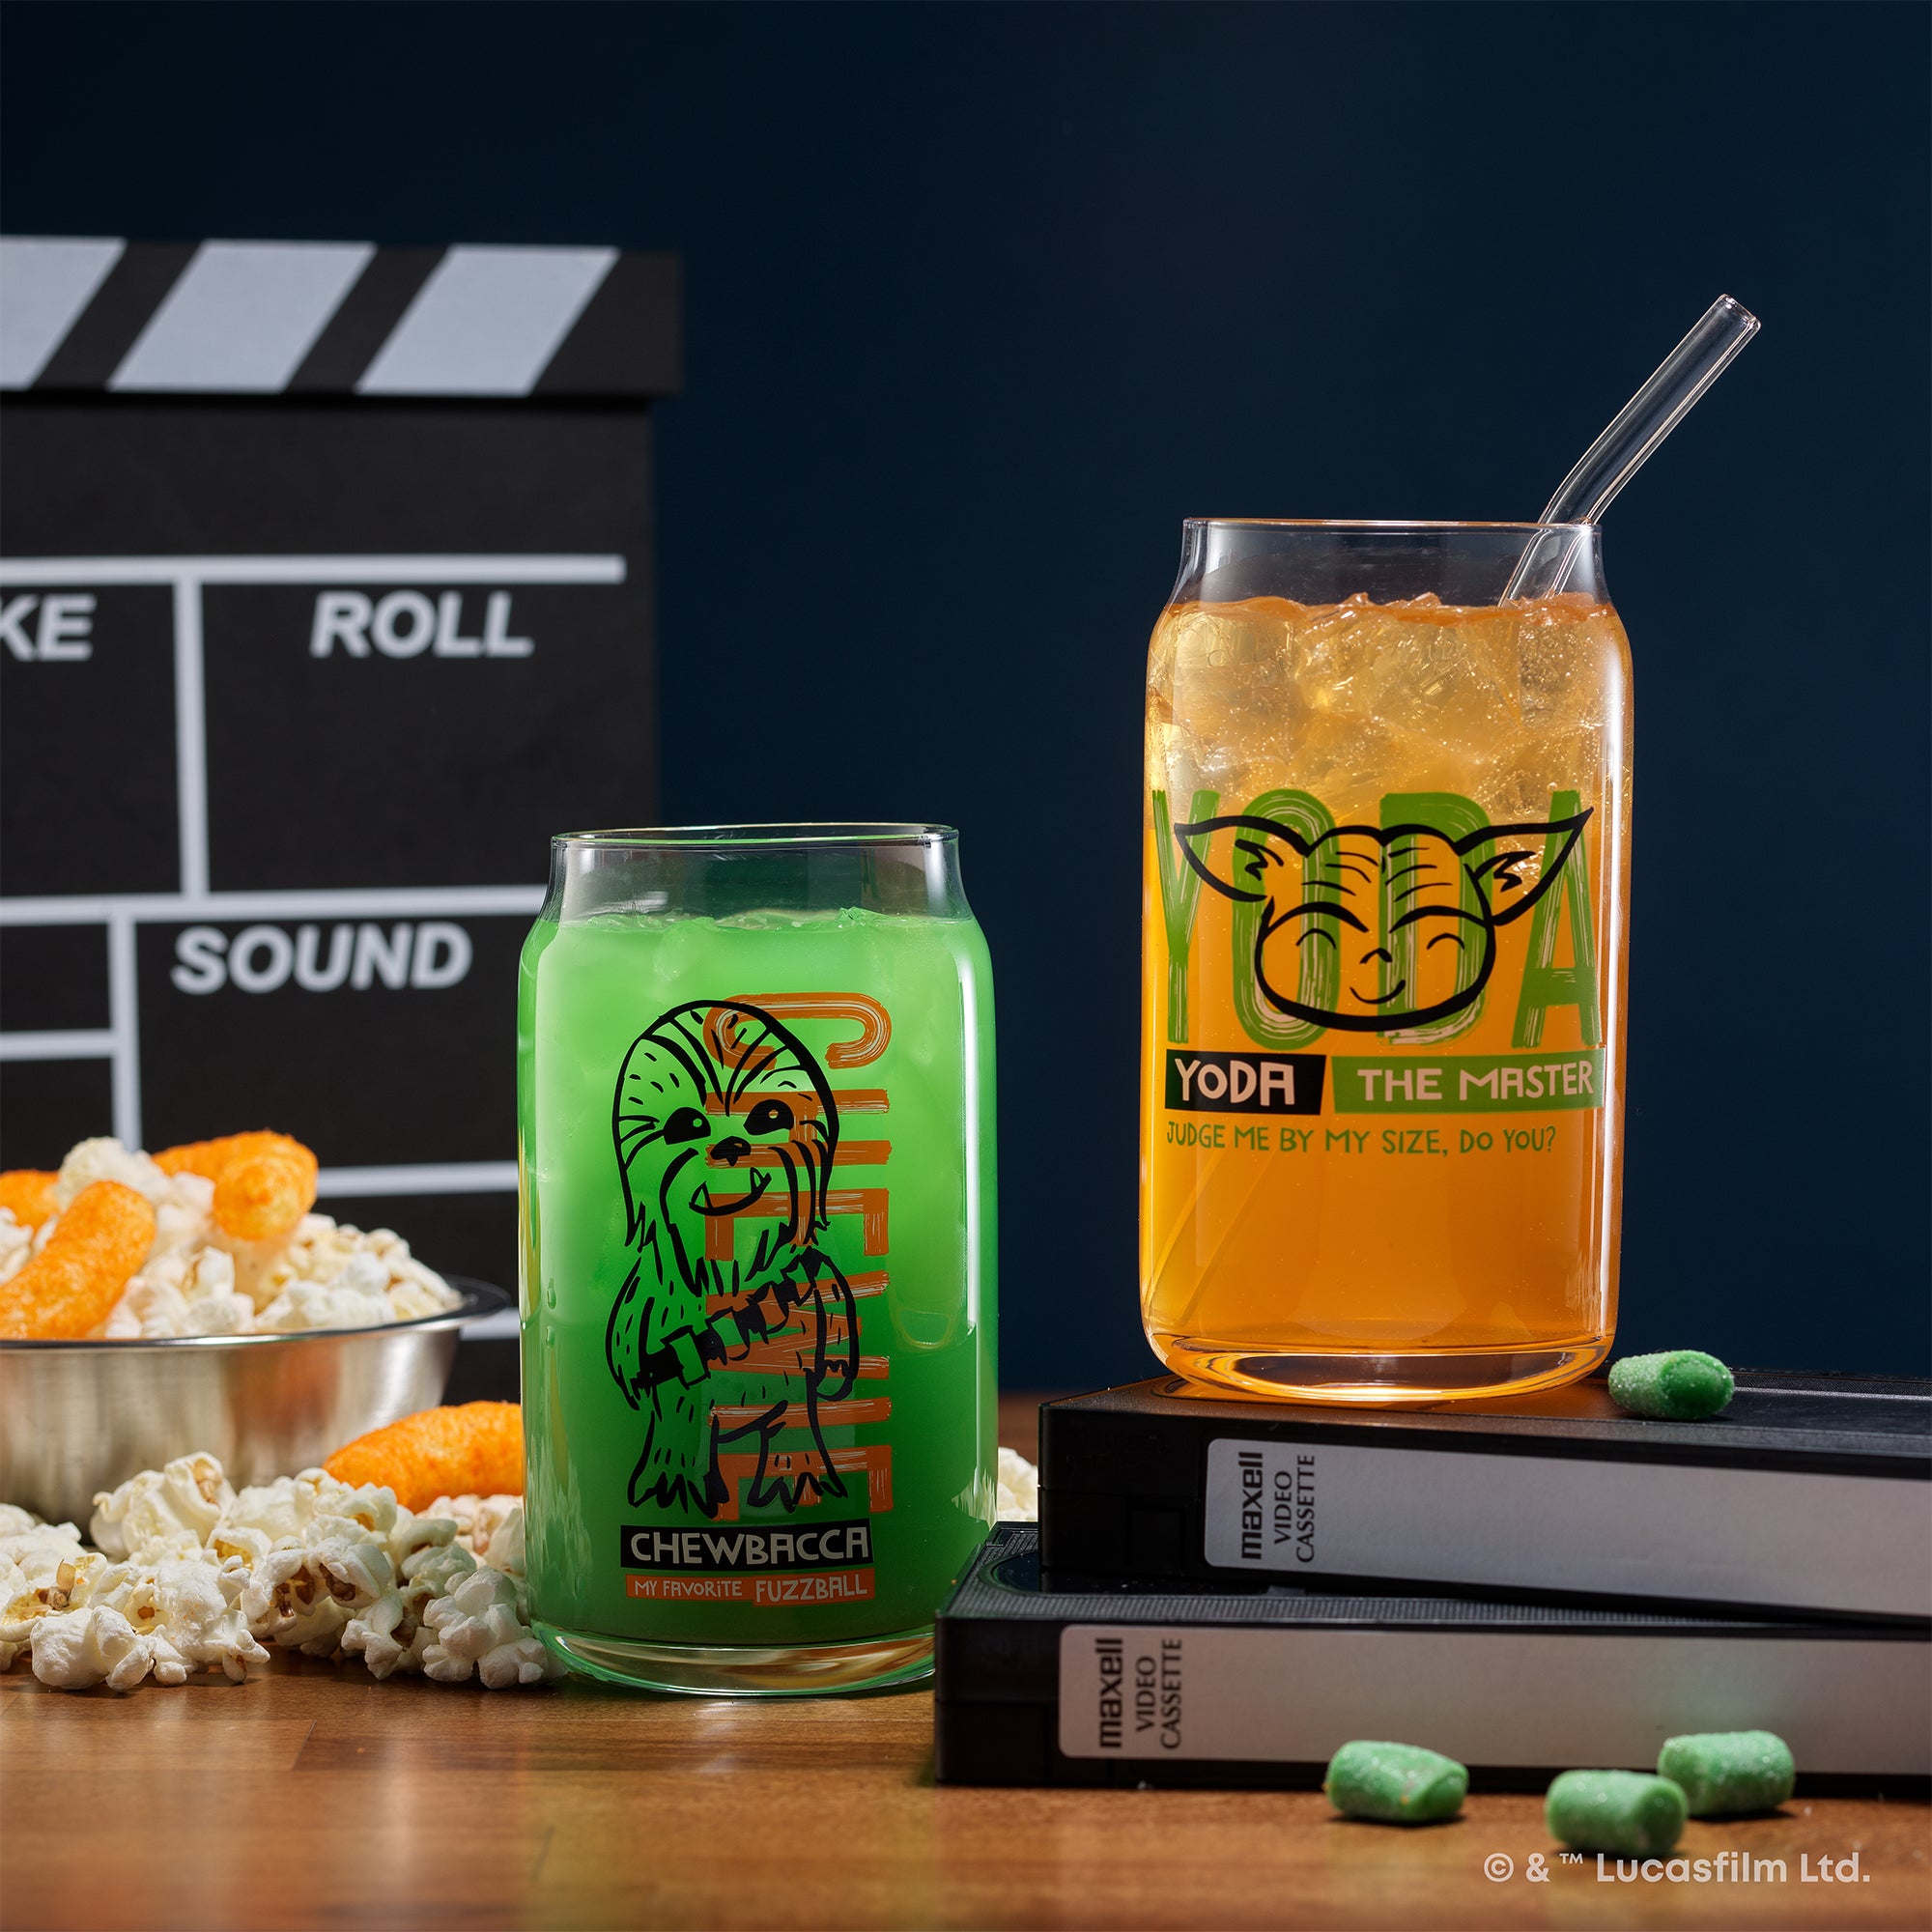 JoyJolt's Star Wars 'Now Playing' glass tumbler set featuring Chewbacca and Yoda. Yoda's glass is on two VHS tapes with a bowl of popcorn and chips in the background. 